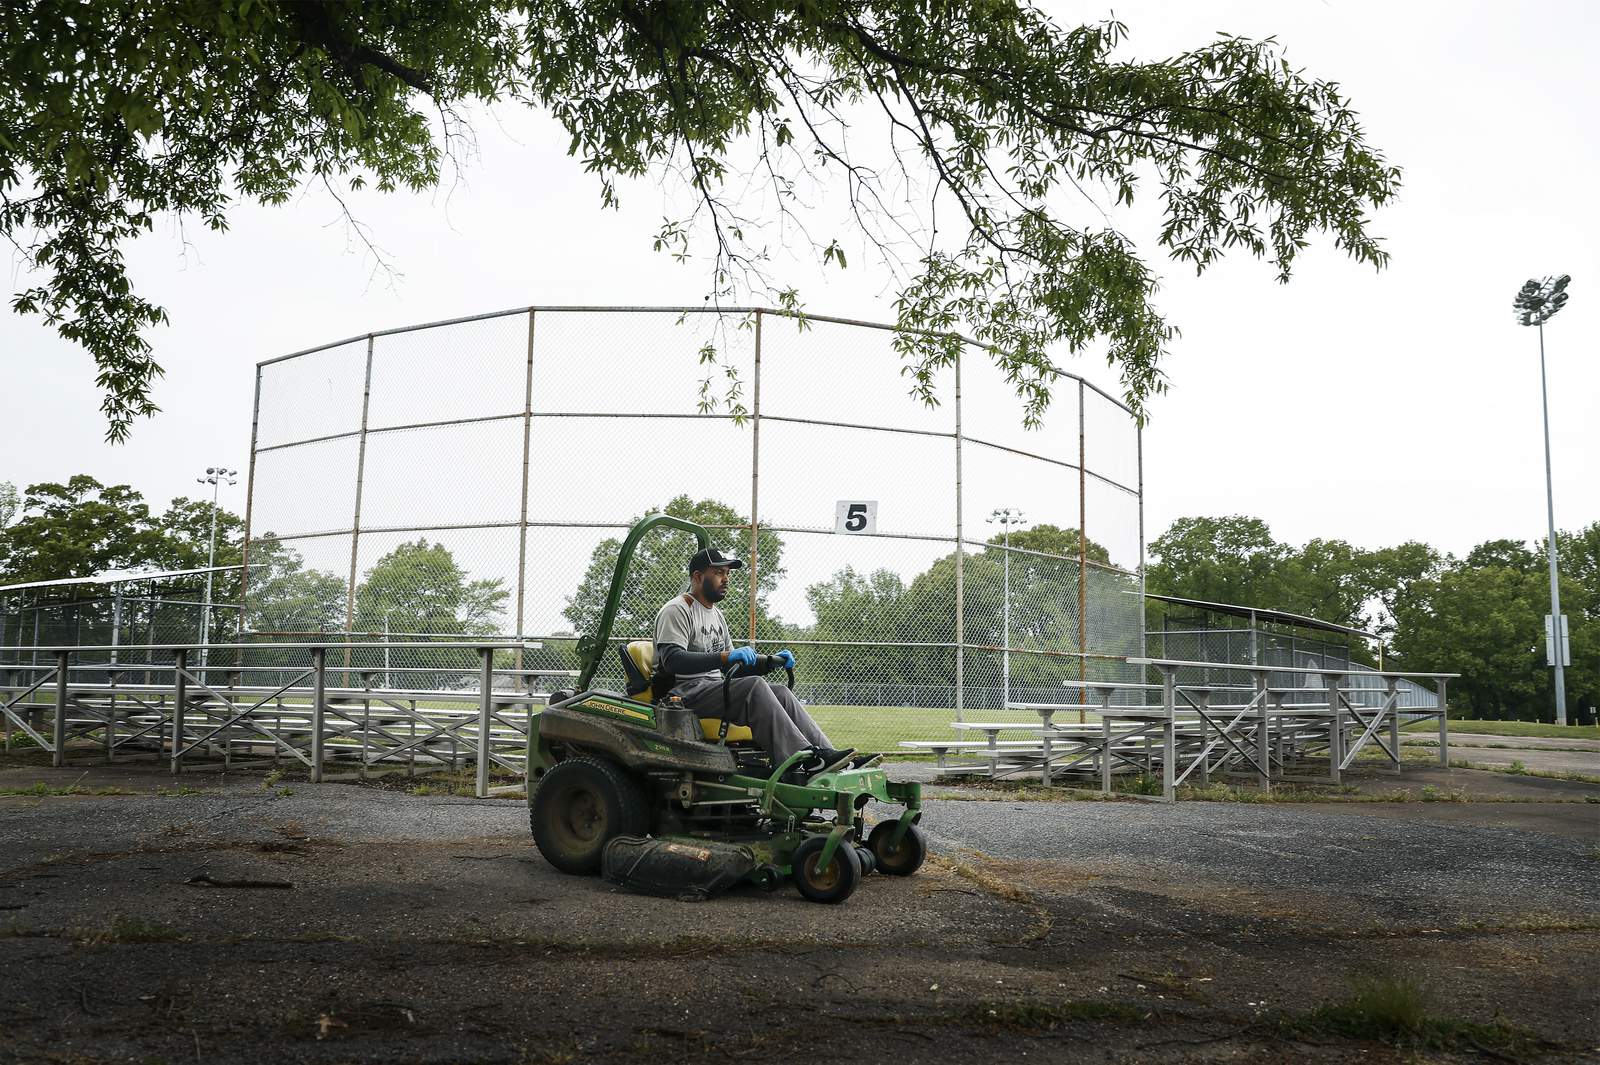 Game on? Little League offers 'best practices' for return